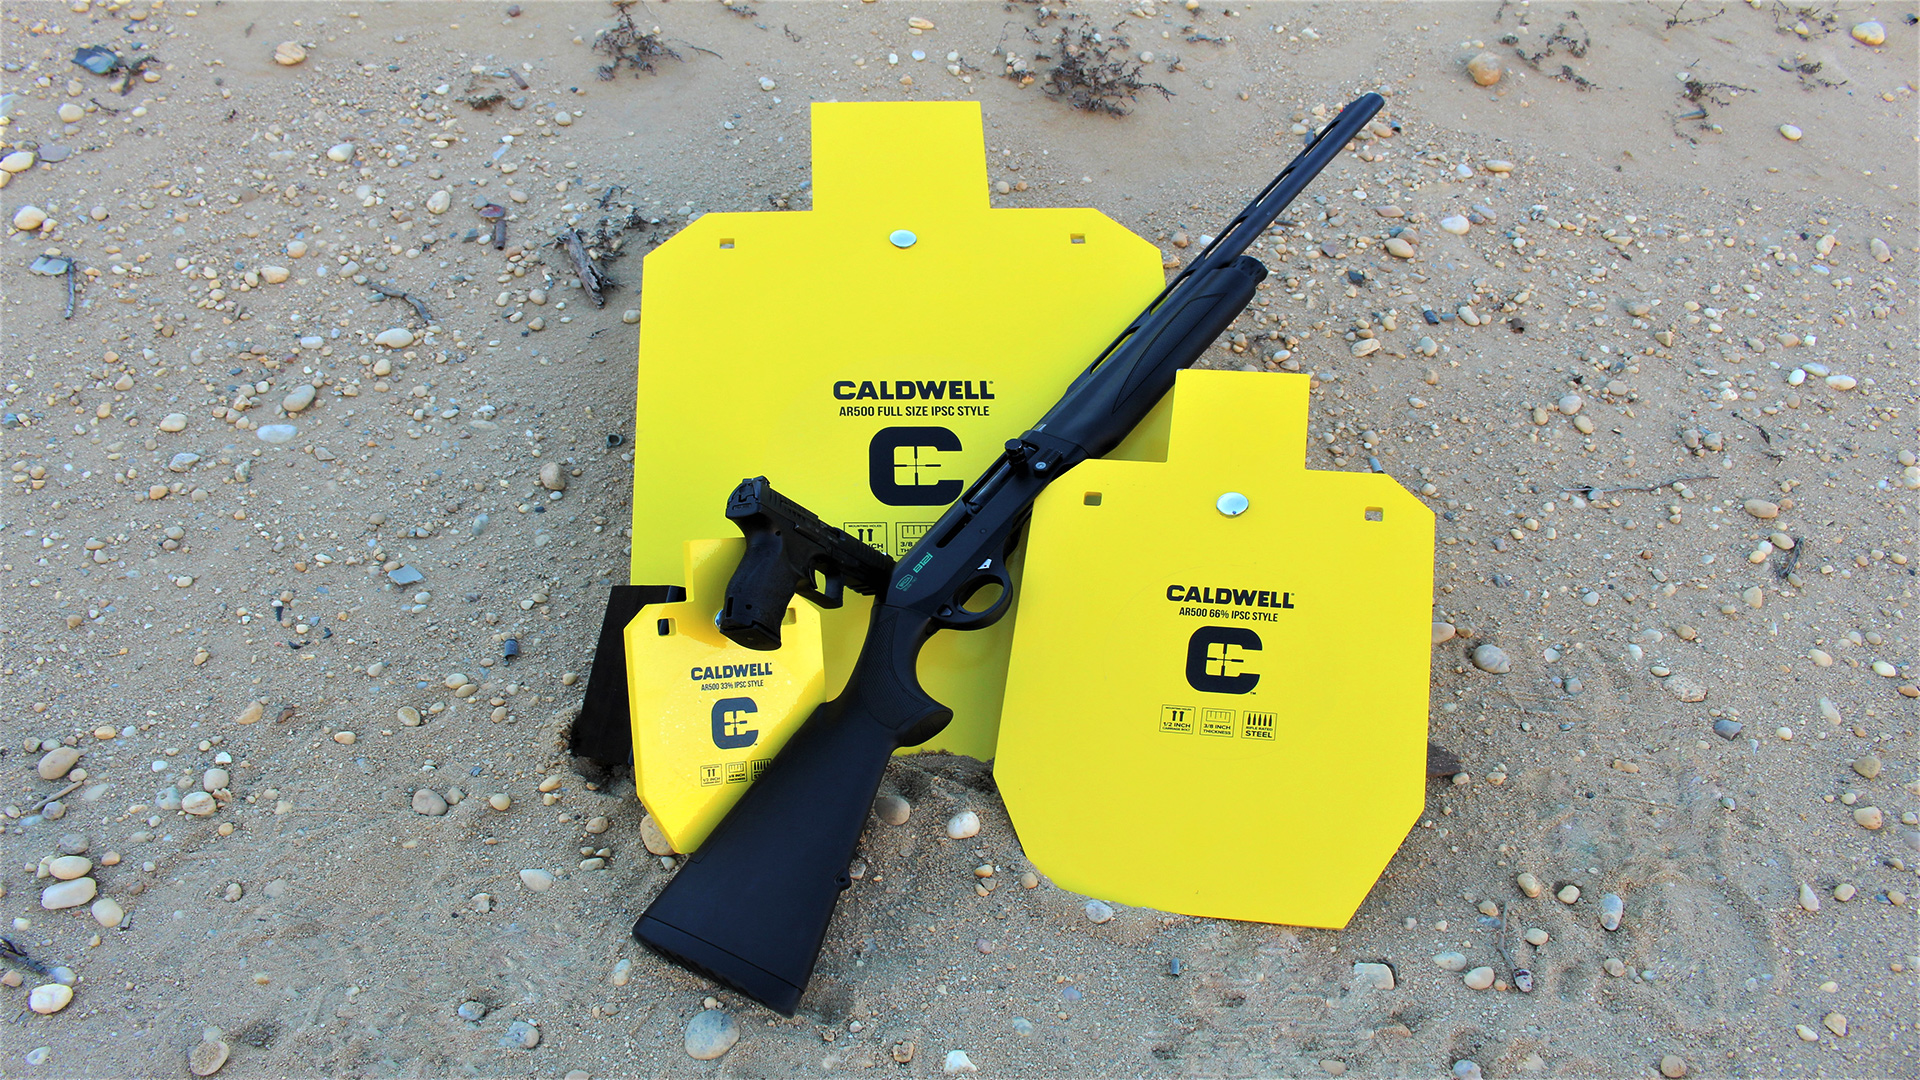 review-caldwell-ipsc-steel-targets-an-nra-shooting-sports-journal